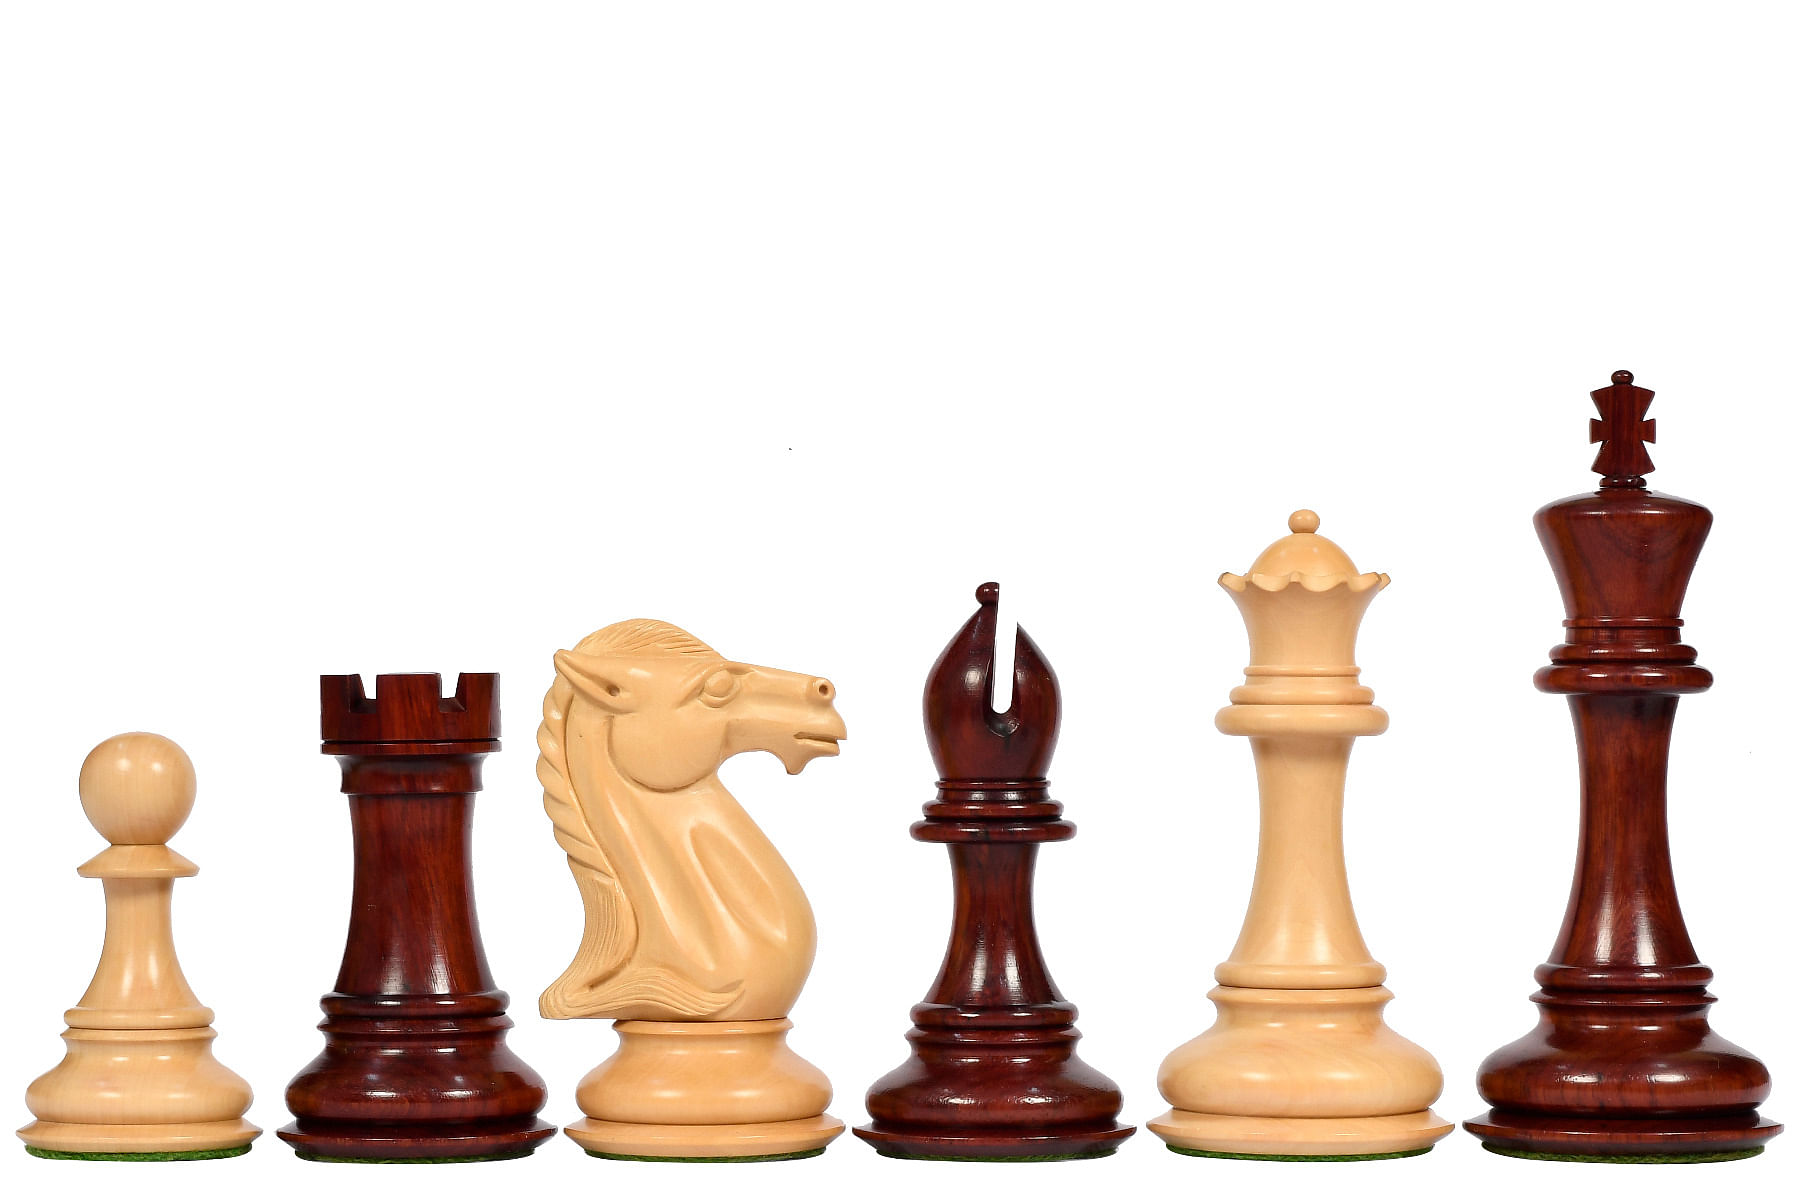 The 2018 CB Giant Monstrous Series Staunton Chess Pieces in Bud Rosewood & Box Wood - 6.0